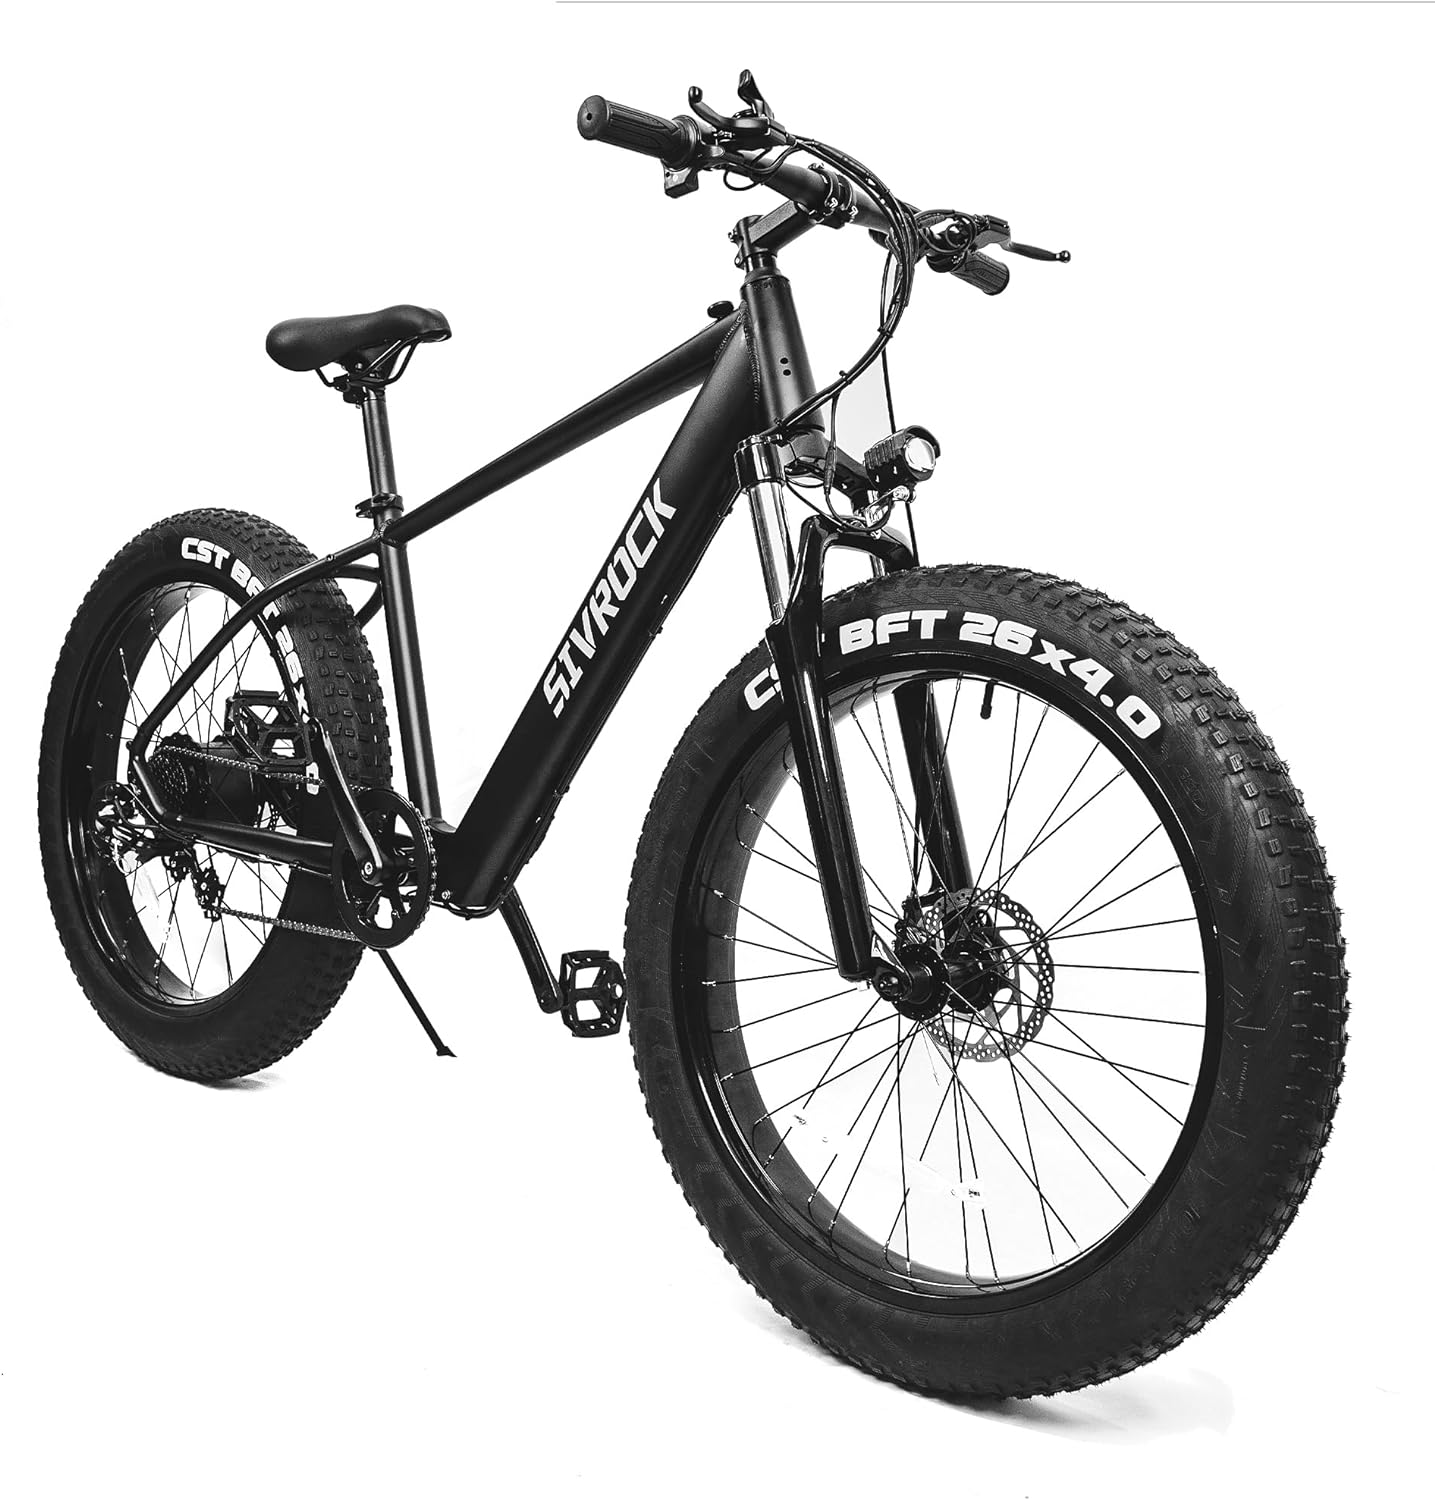 SIVROCK Electric Bike For Adults, 26 X 4.0 Inch Fat Tire Electric Mountain Bicycle, *1000W Motor 48V 15Ah Ebike With Professional 7 Speed, Hidden Lithium-Ion Battery, Hydraulic Suspension, LCD Display